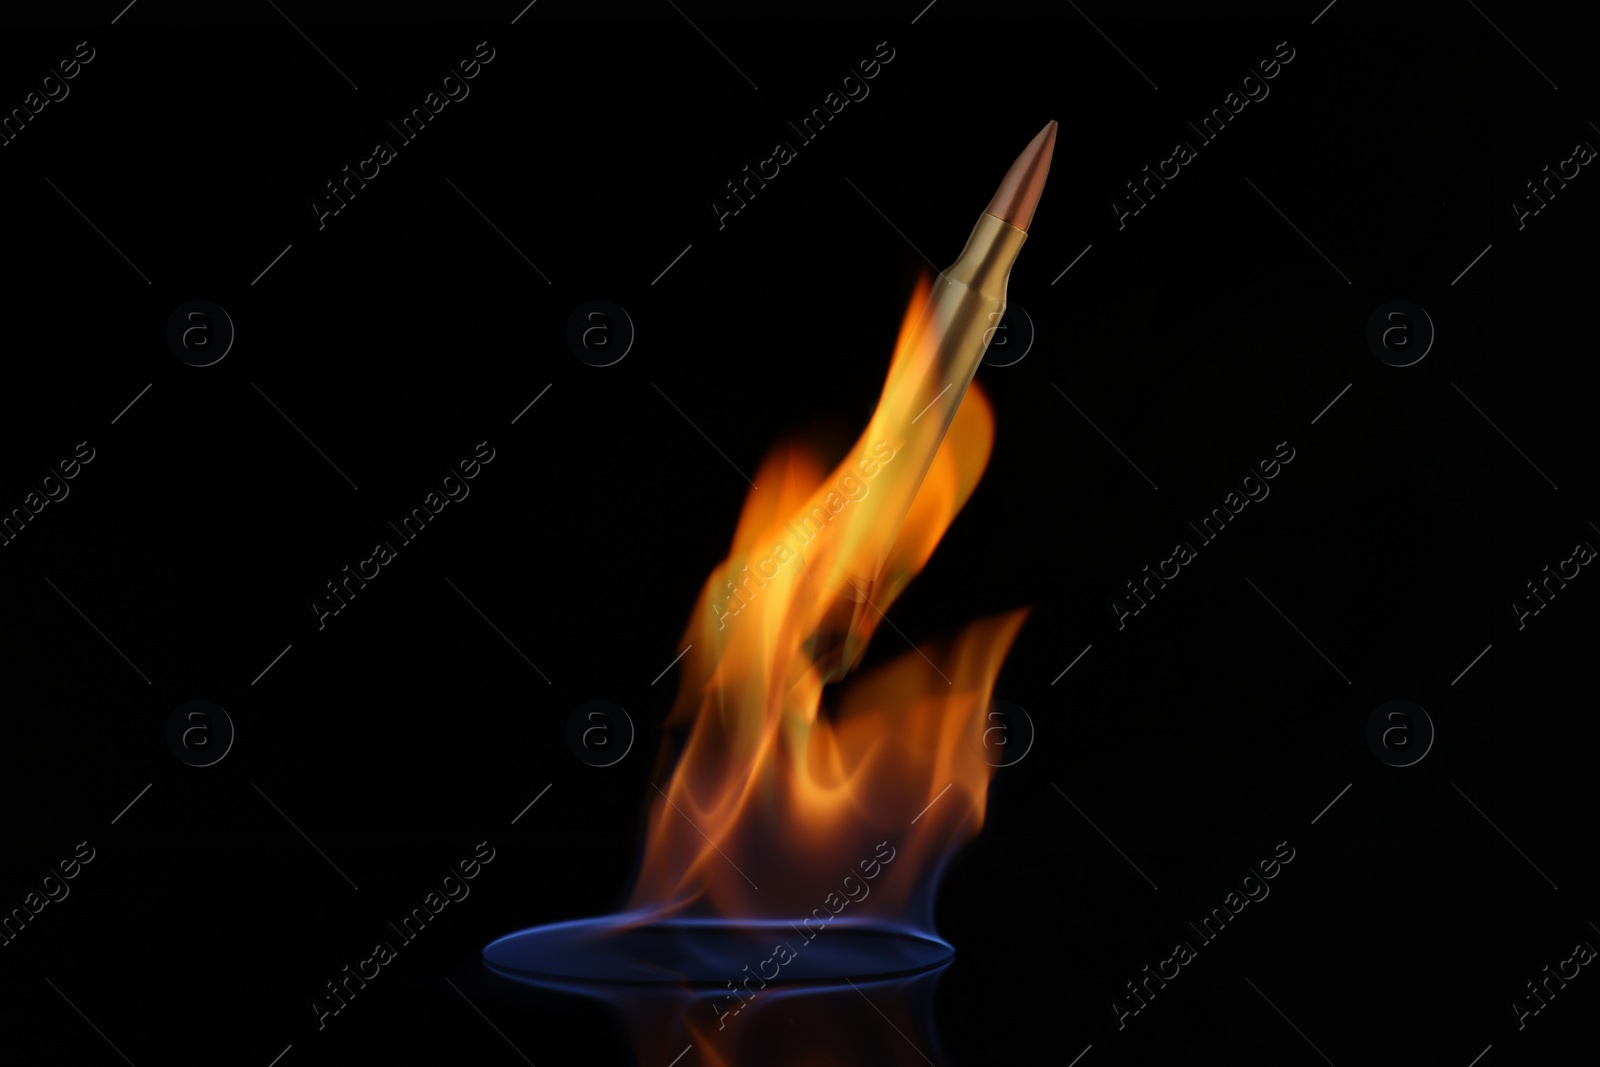 Image of Bullet with flames flying on black background